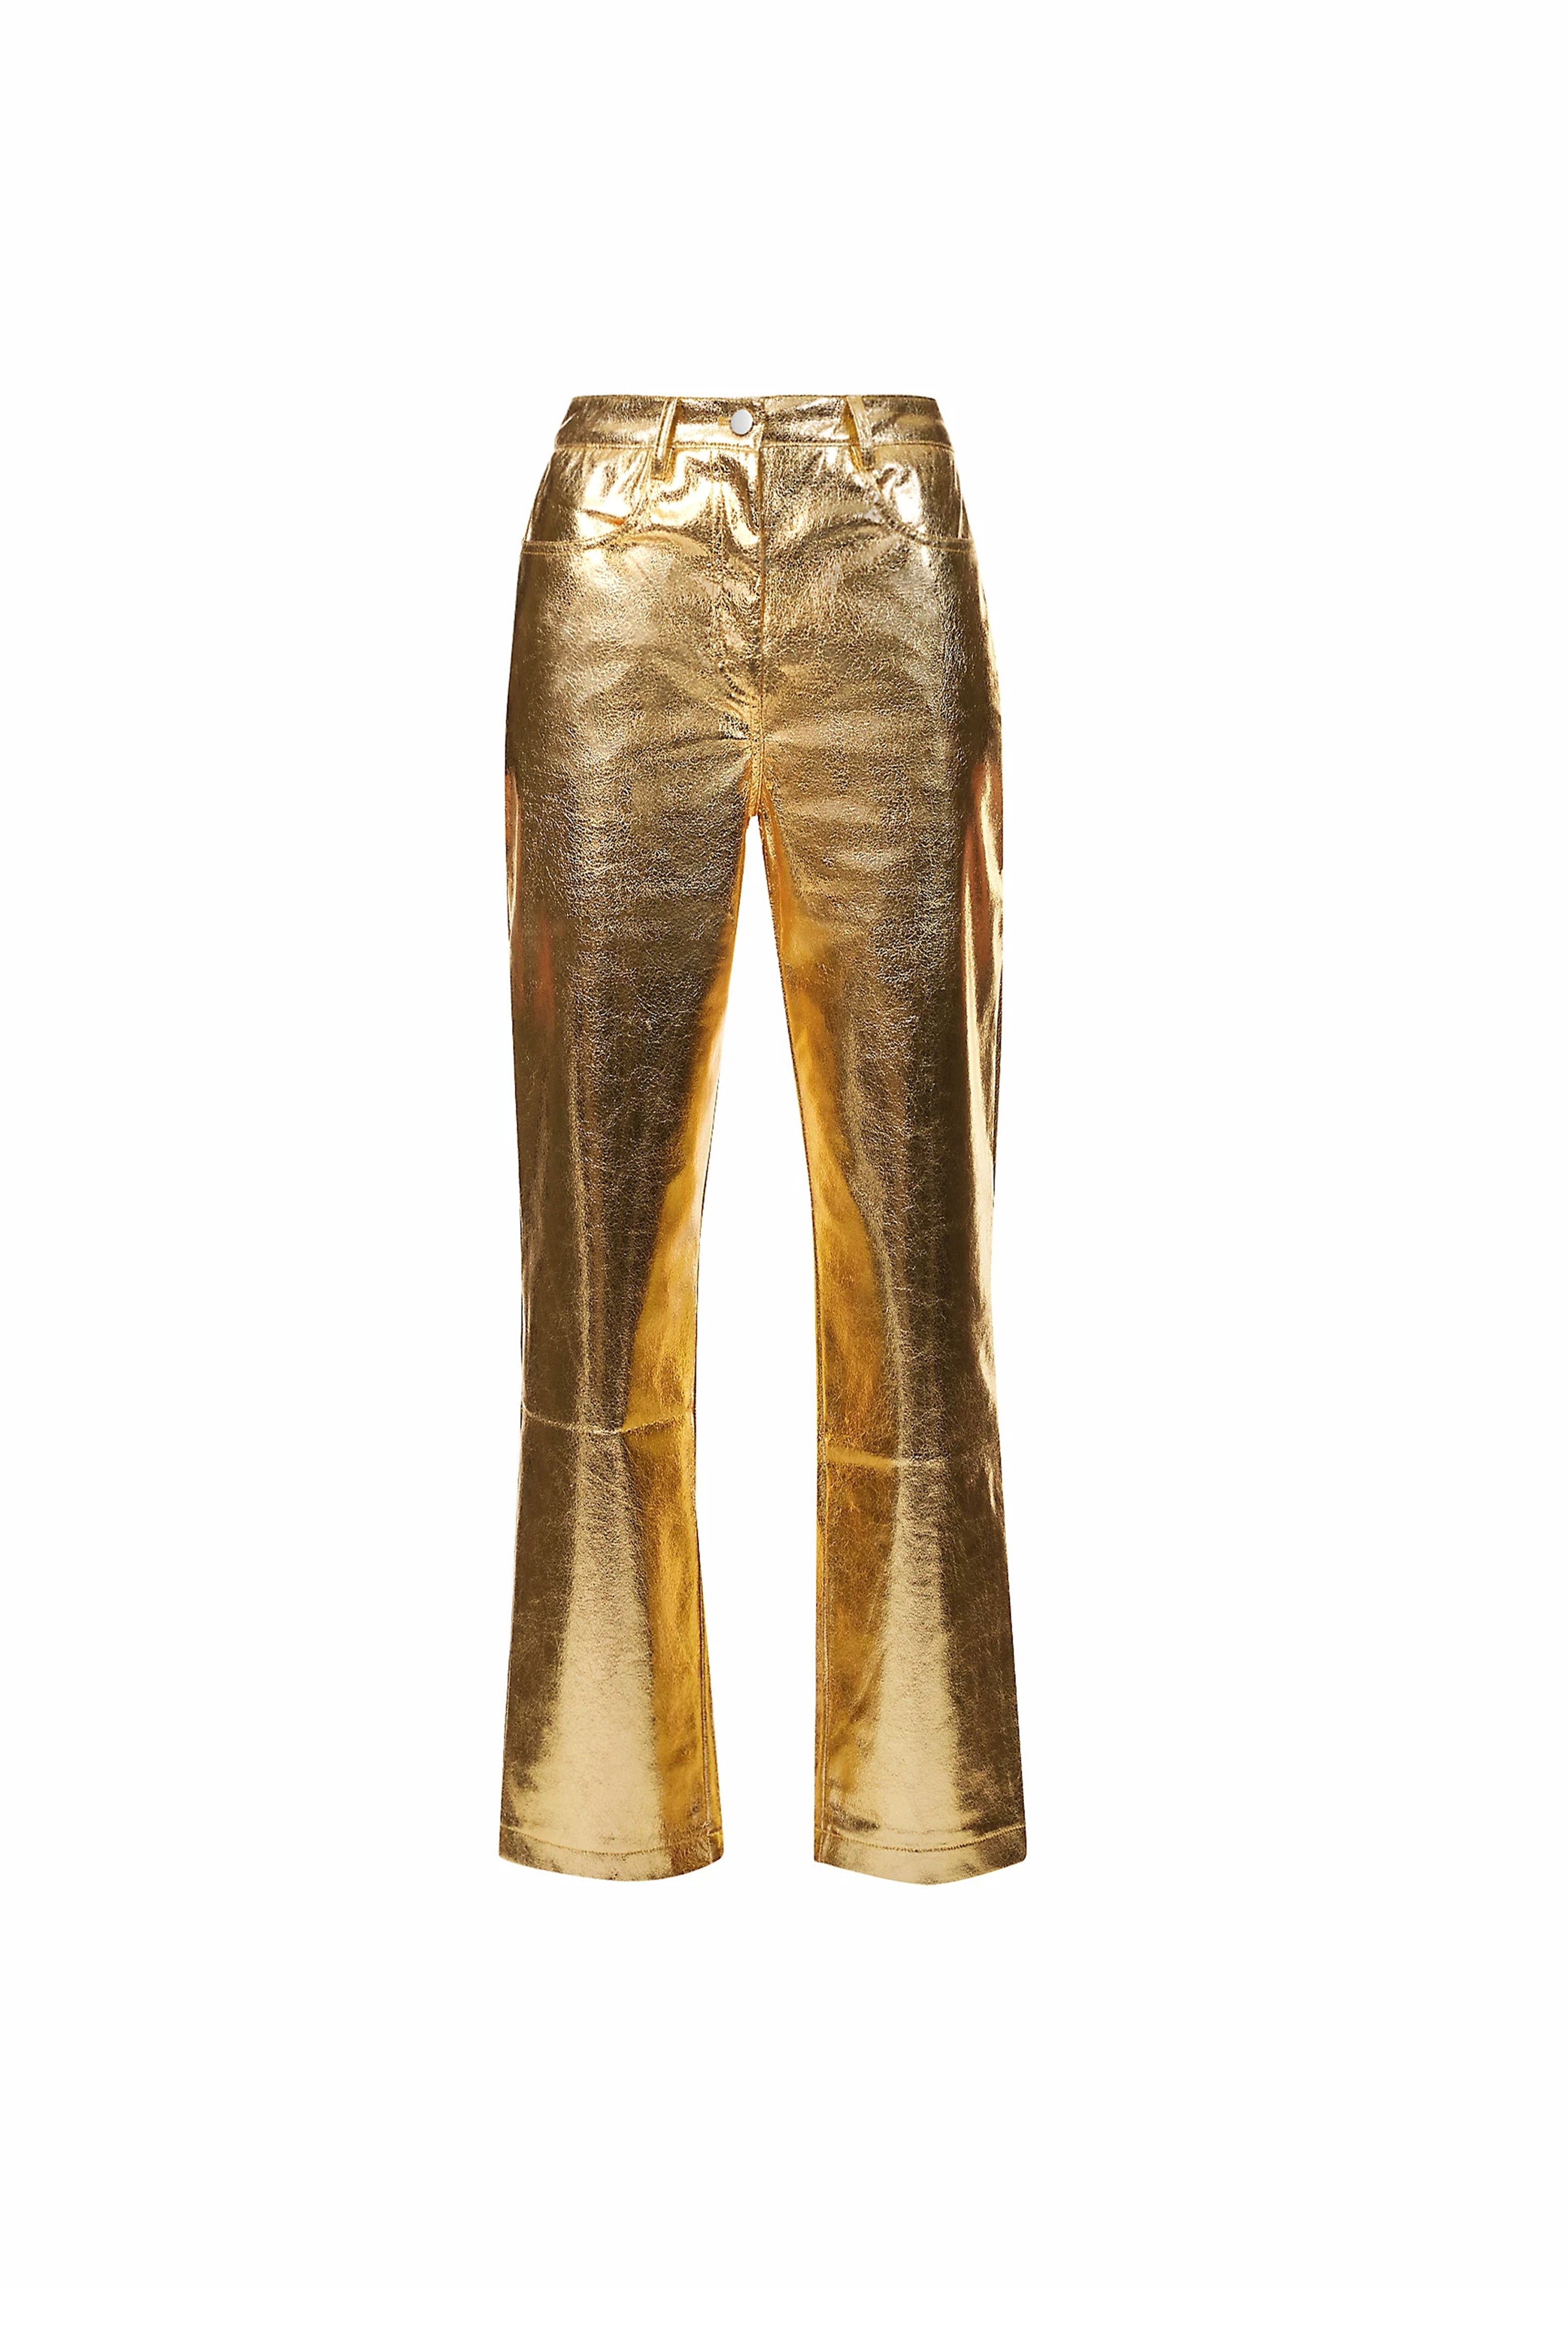 Lupe Gold Textured Metallic Trousers | Wolf & Badger (US)